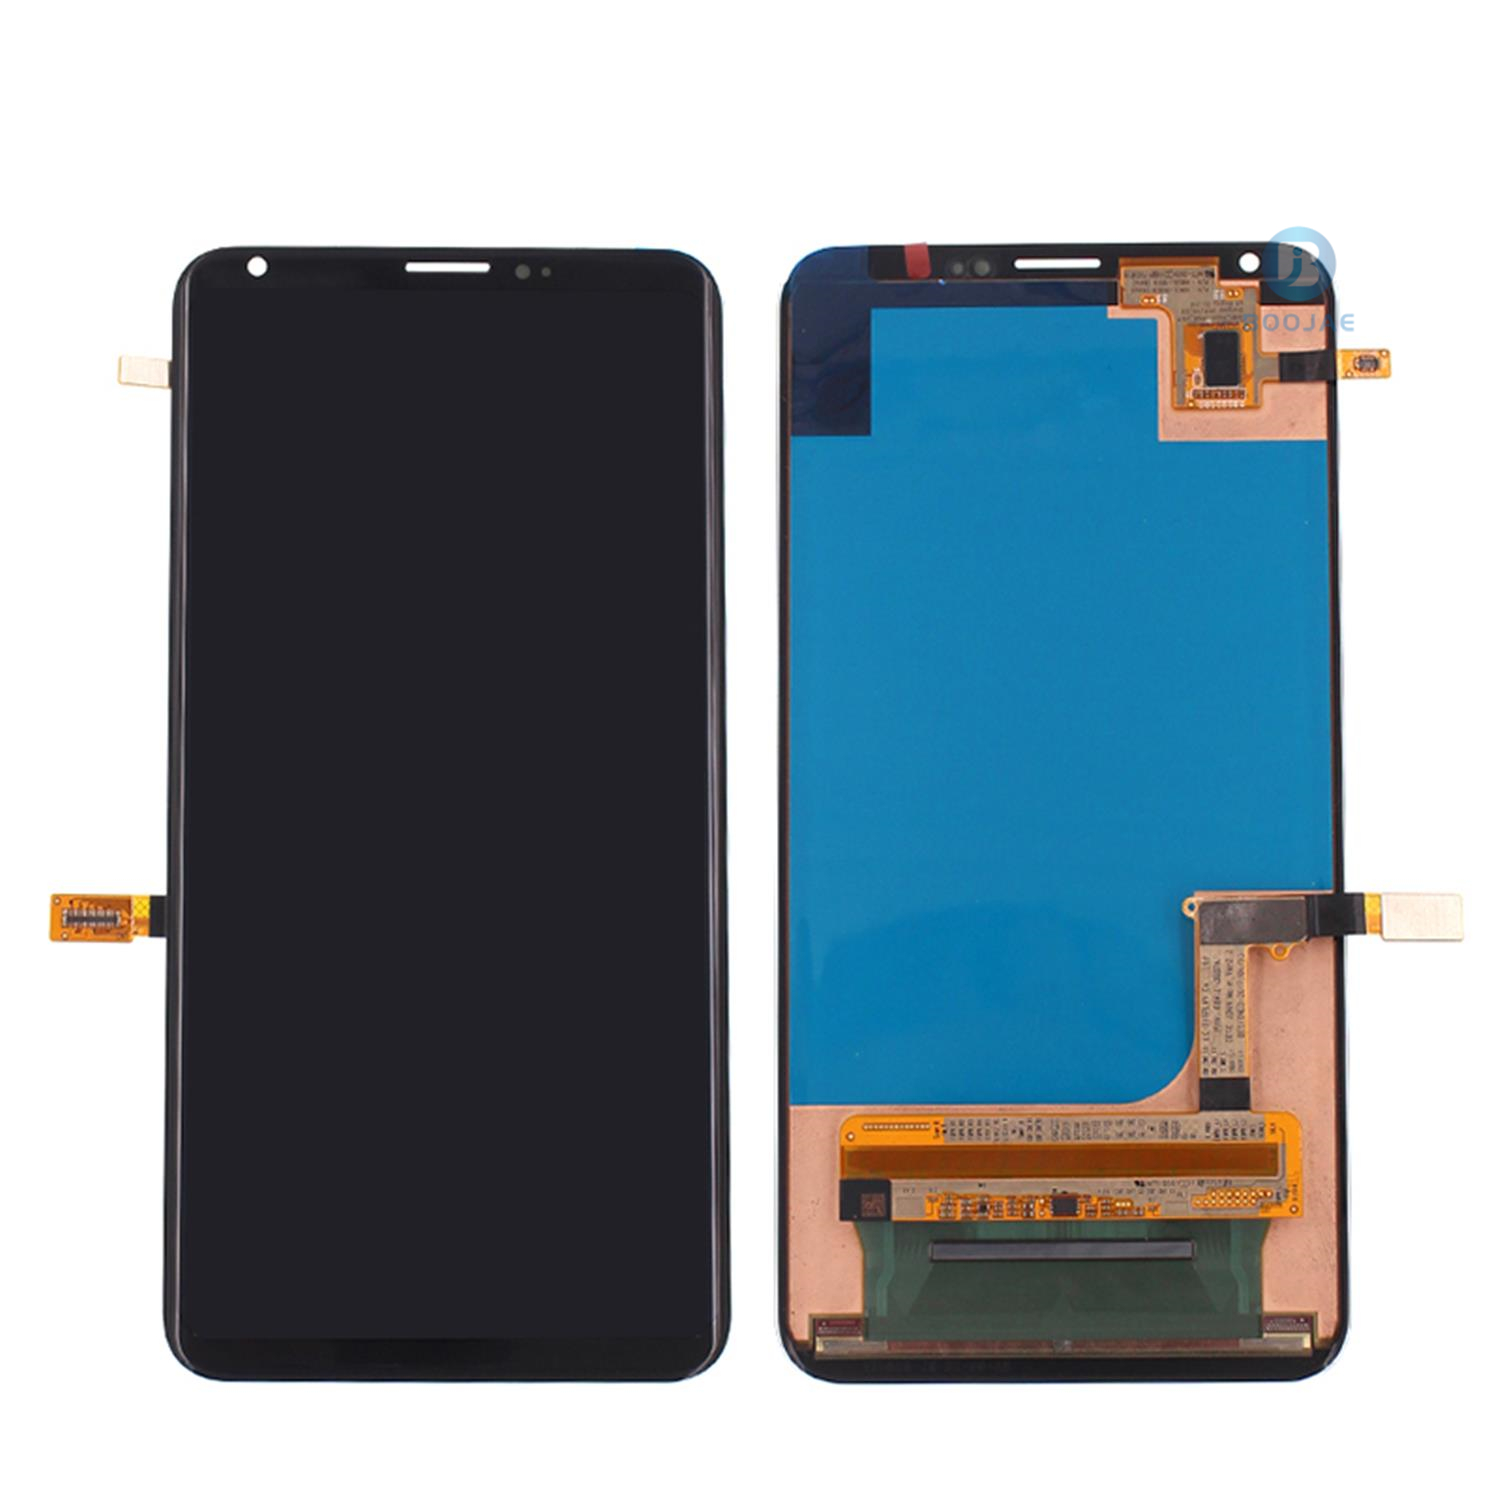 For LG V30 LCD Screen Display and Touch Panel Digitizer Assembly Replacement